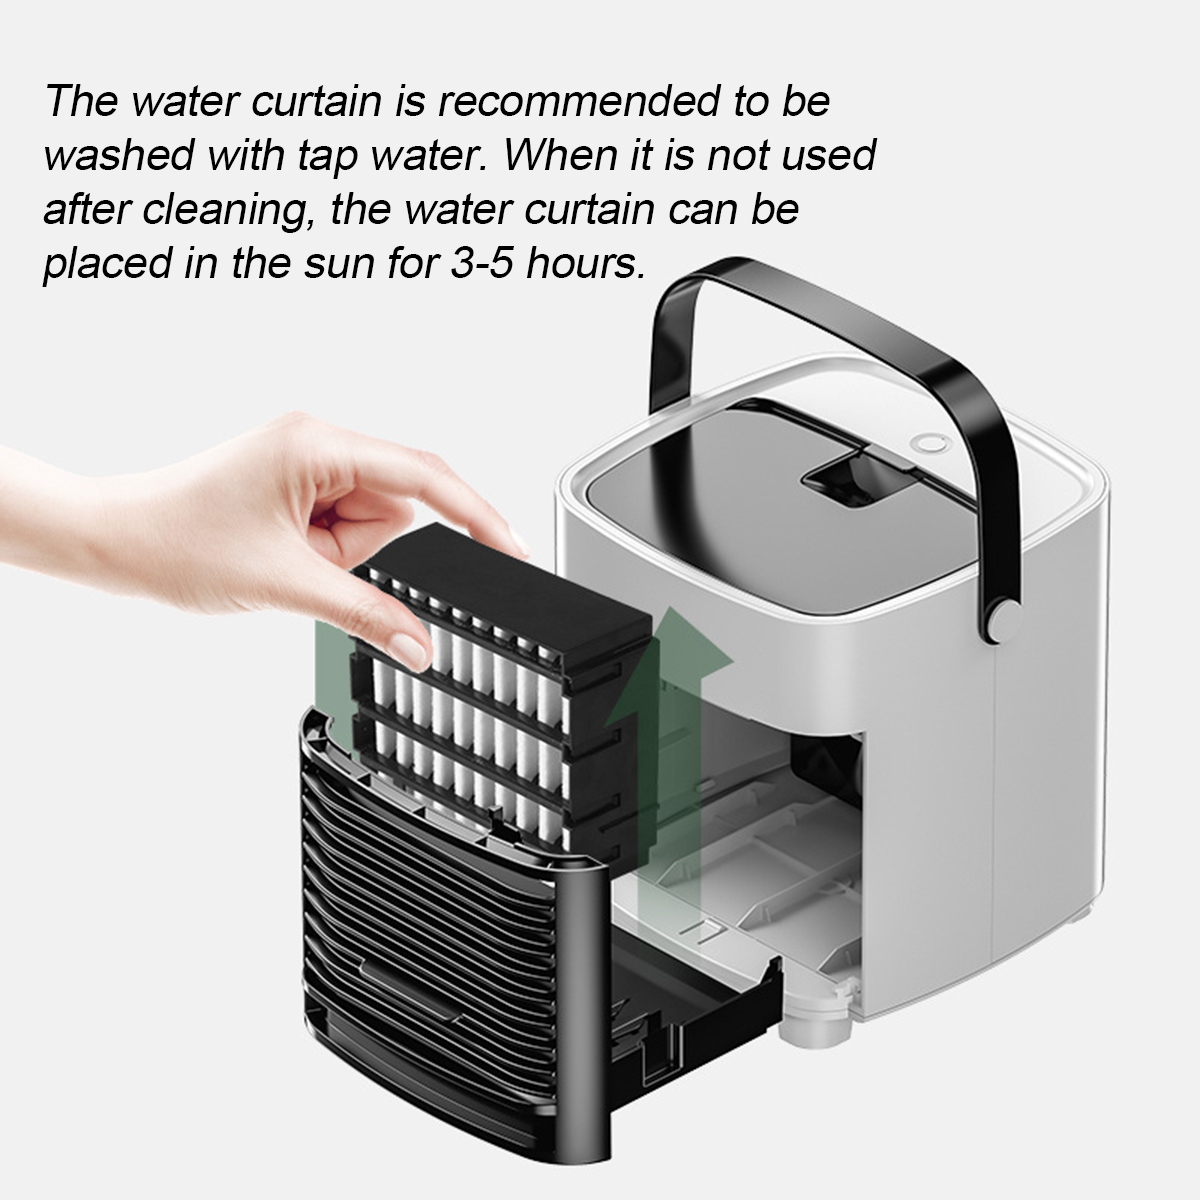 Ultra-Quiet-Portable-USB-Air-Conditioning-Fan-Bedroom-Living-Room-Office-Travel-Water-Cooling-Three--1710158-7